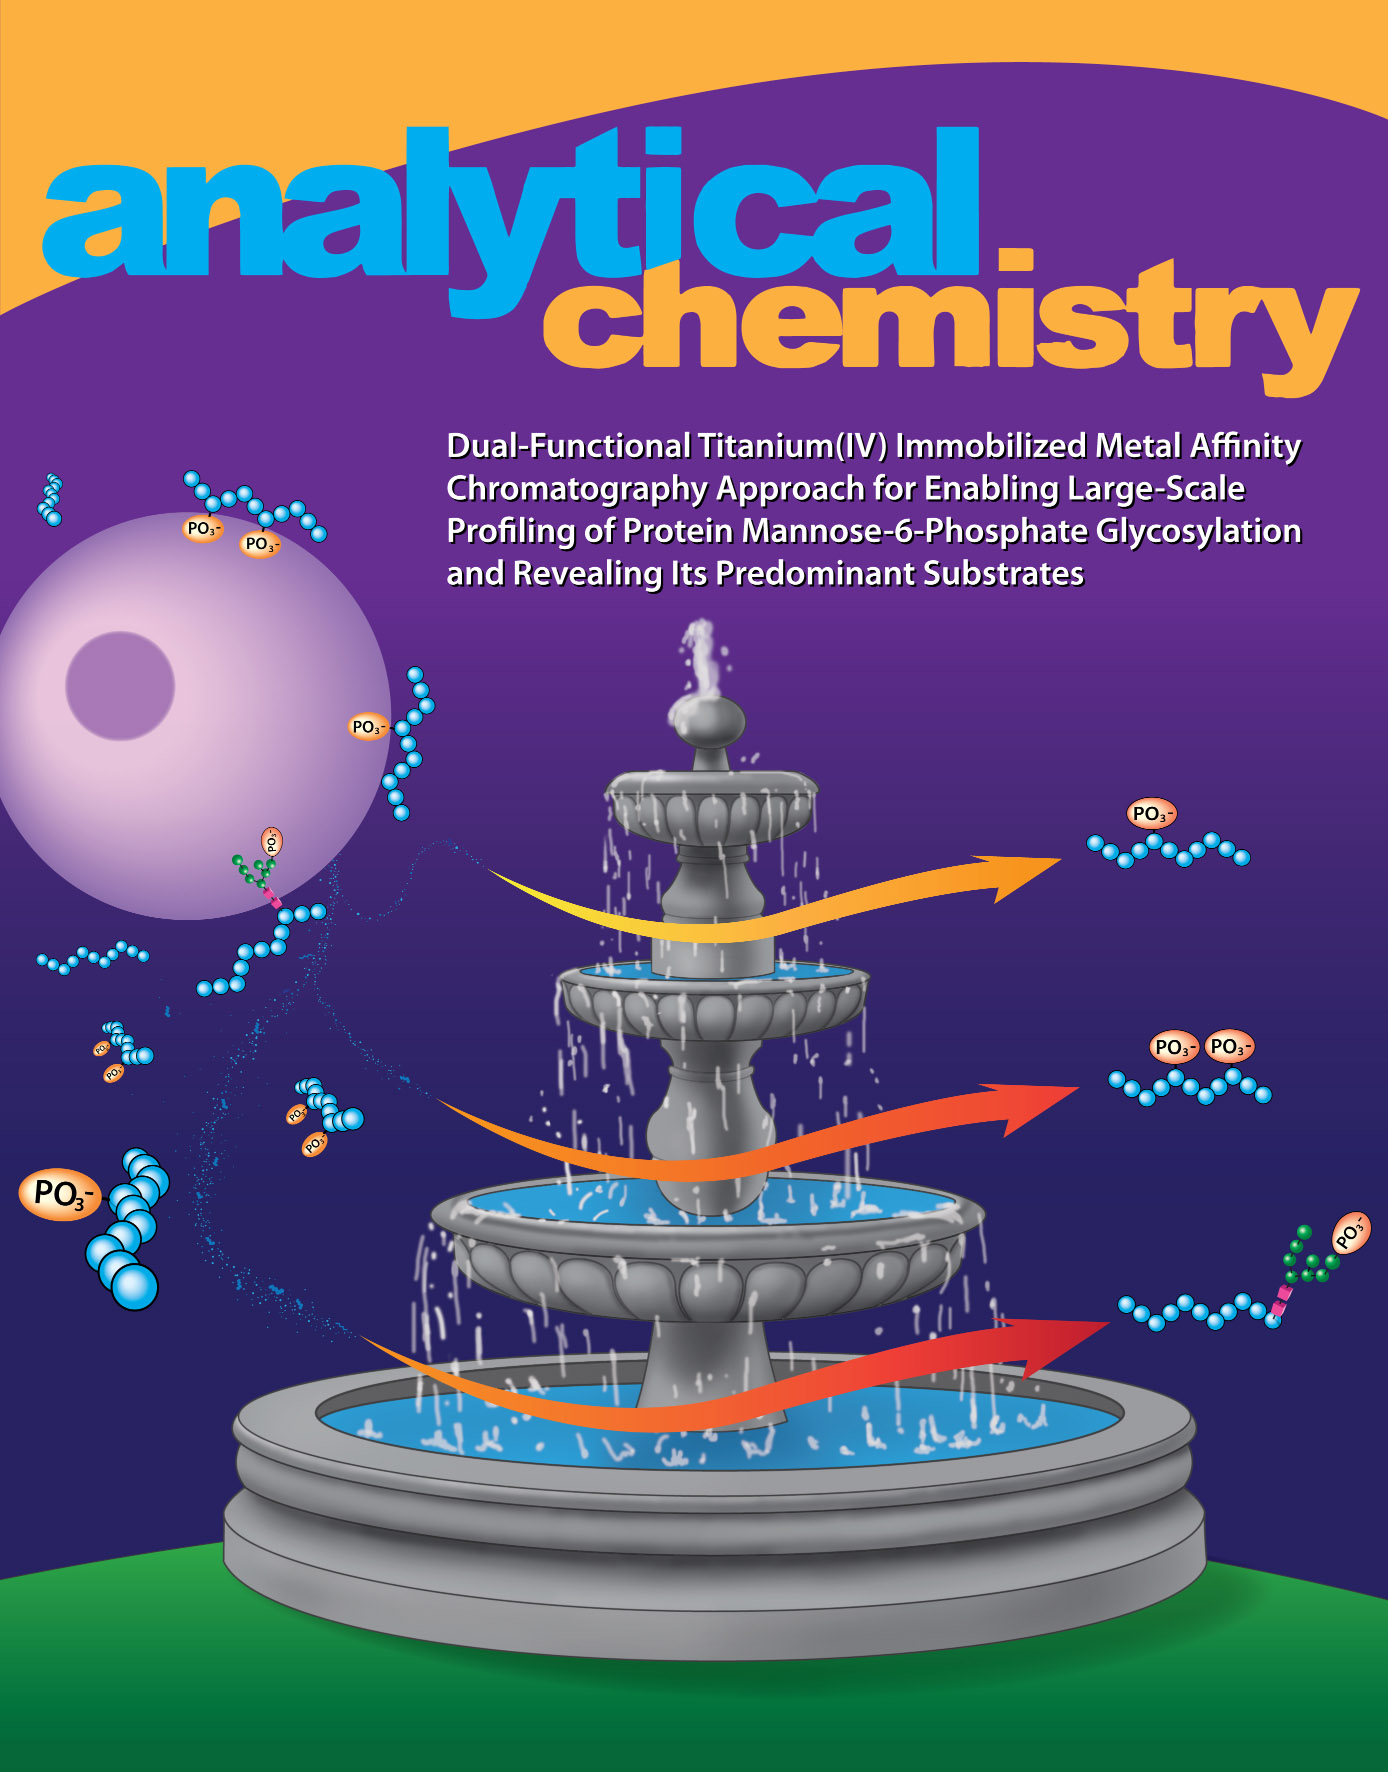 Analytical Chemistry journal cover